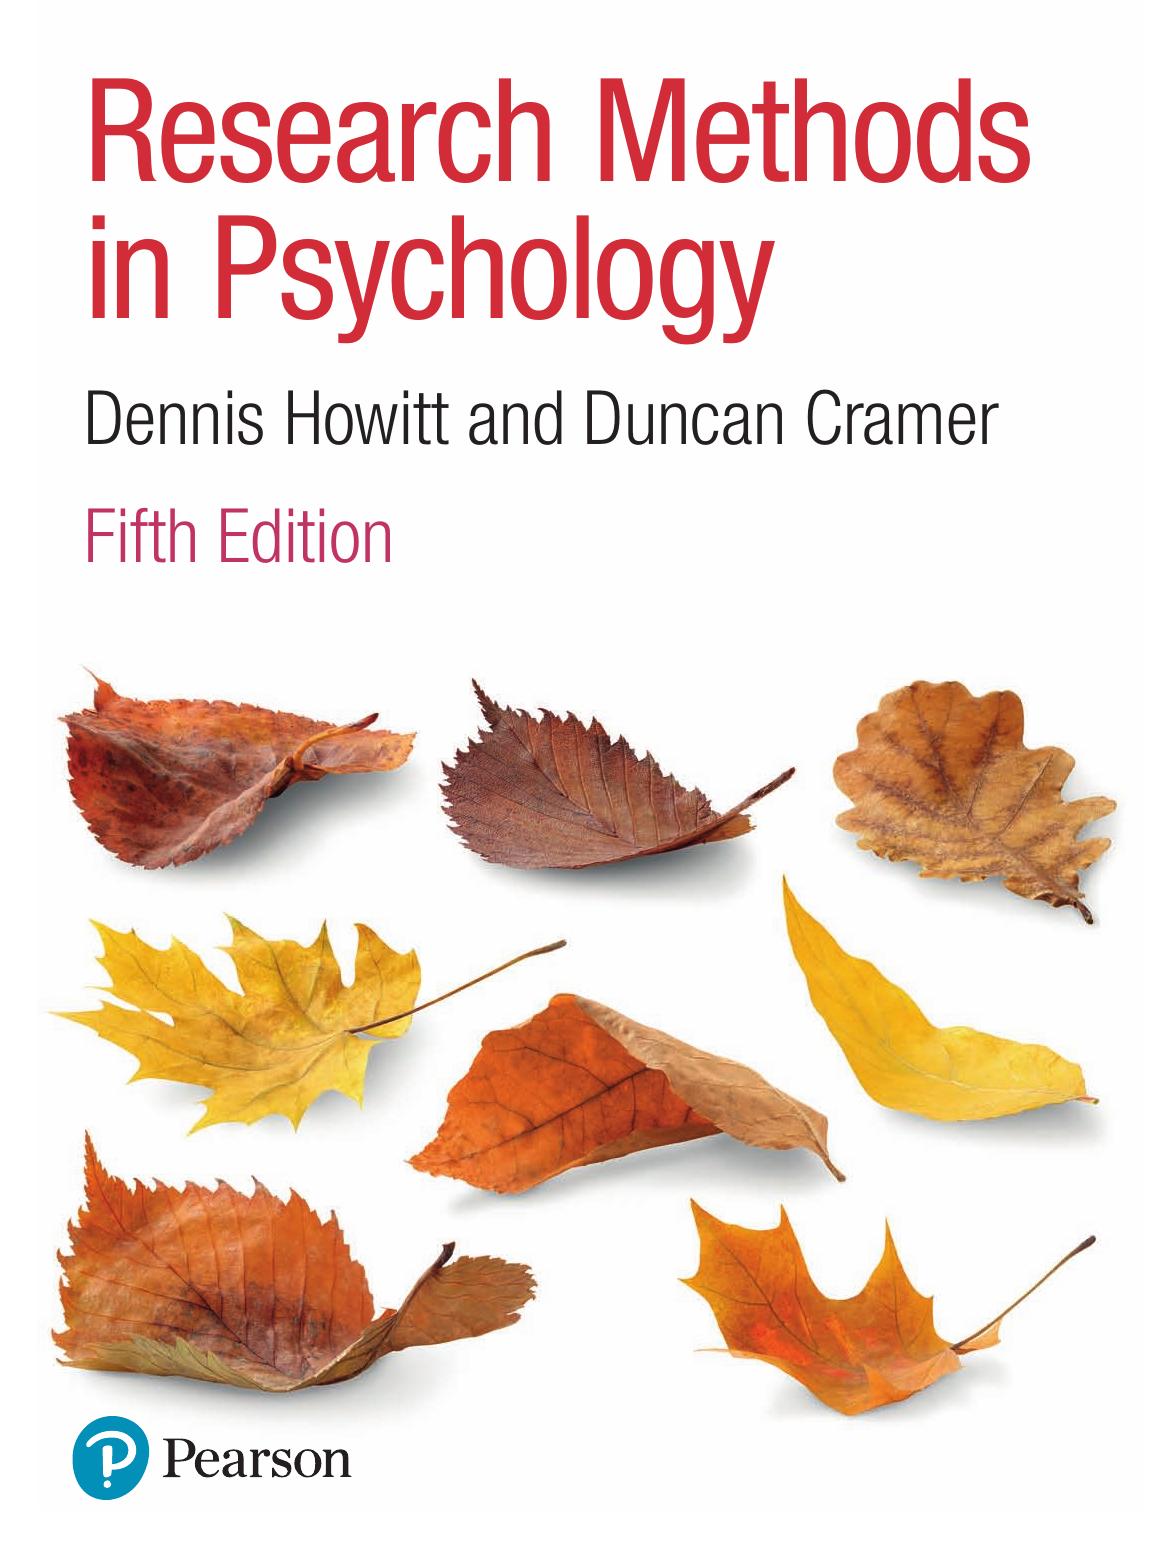 Research Methods In Psychology 5th Edition Softarchive